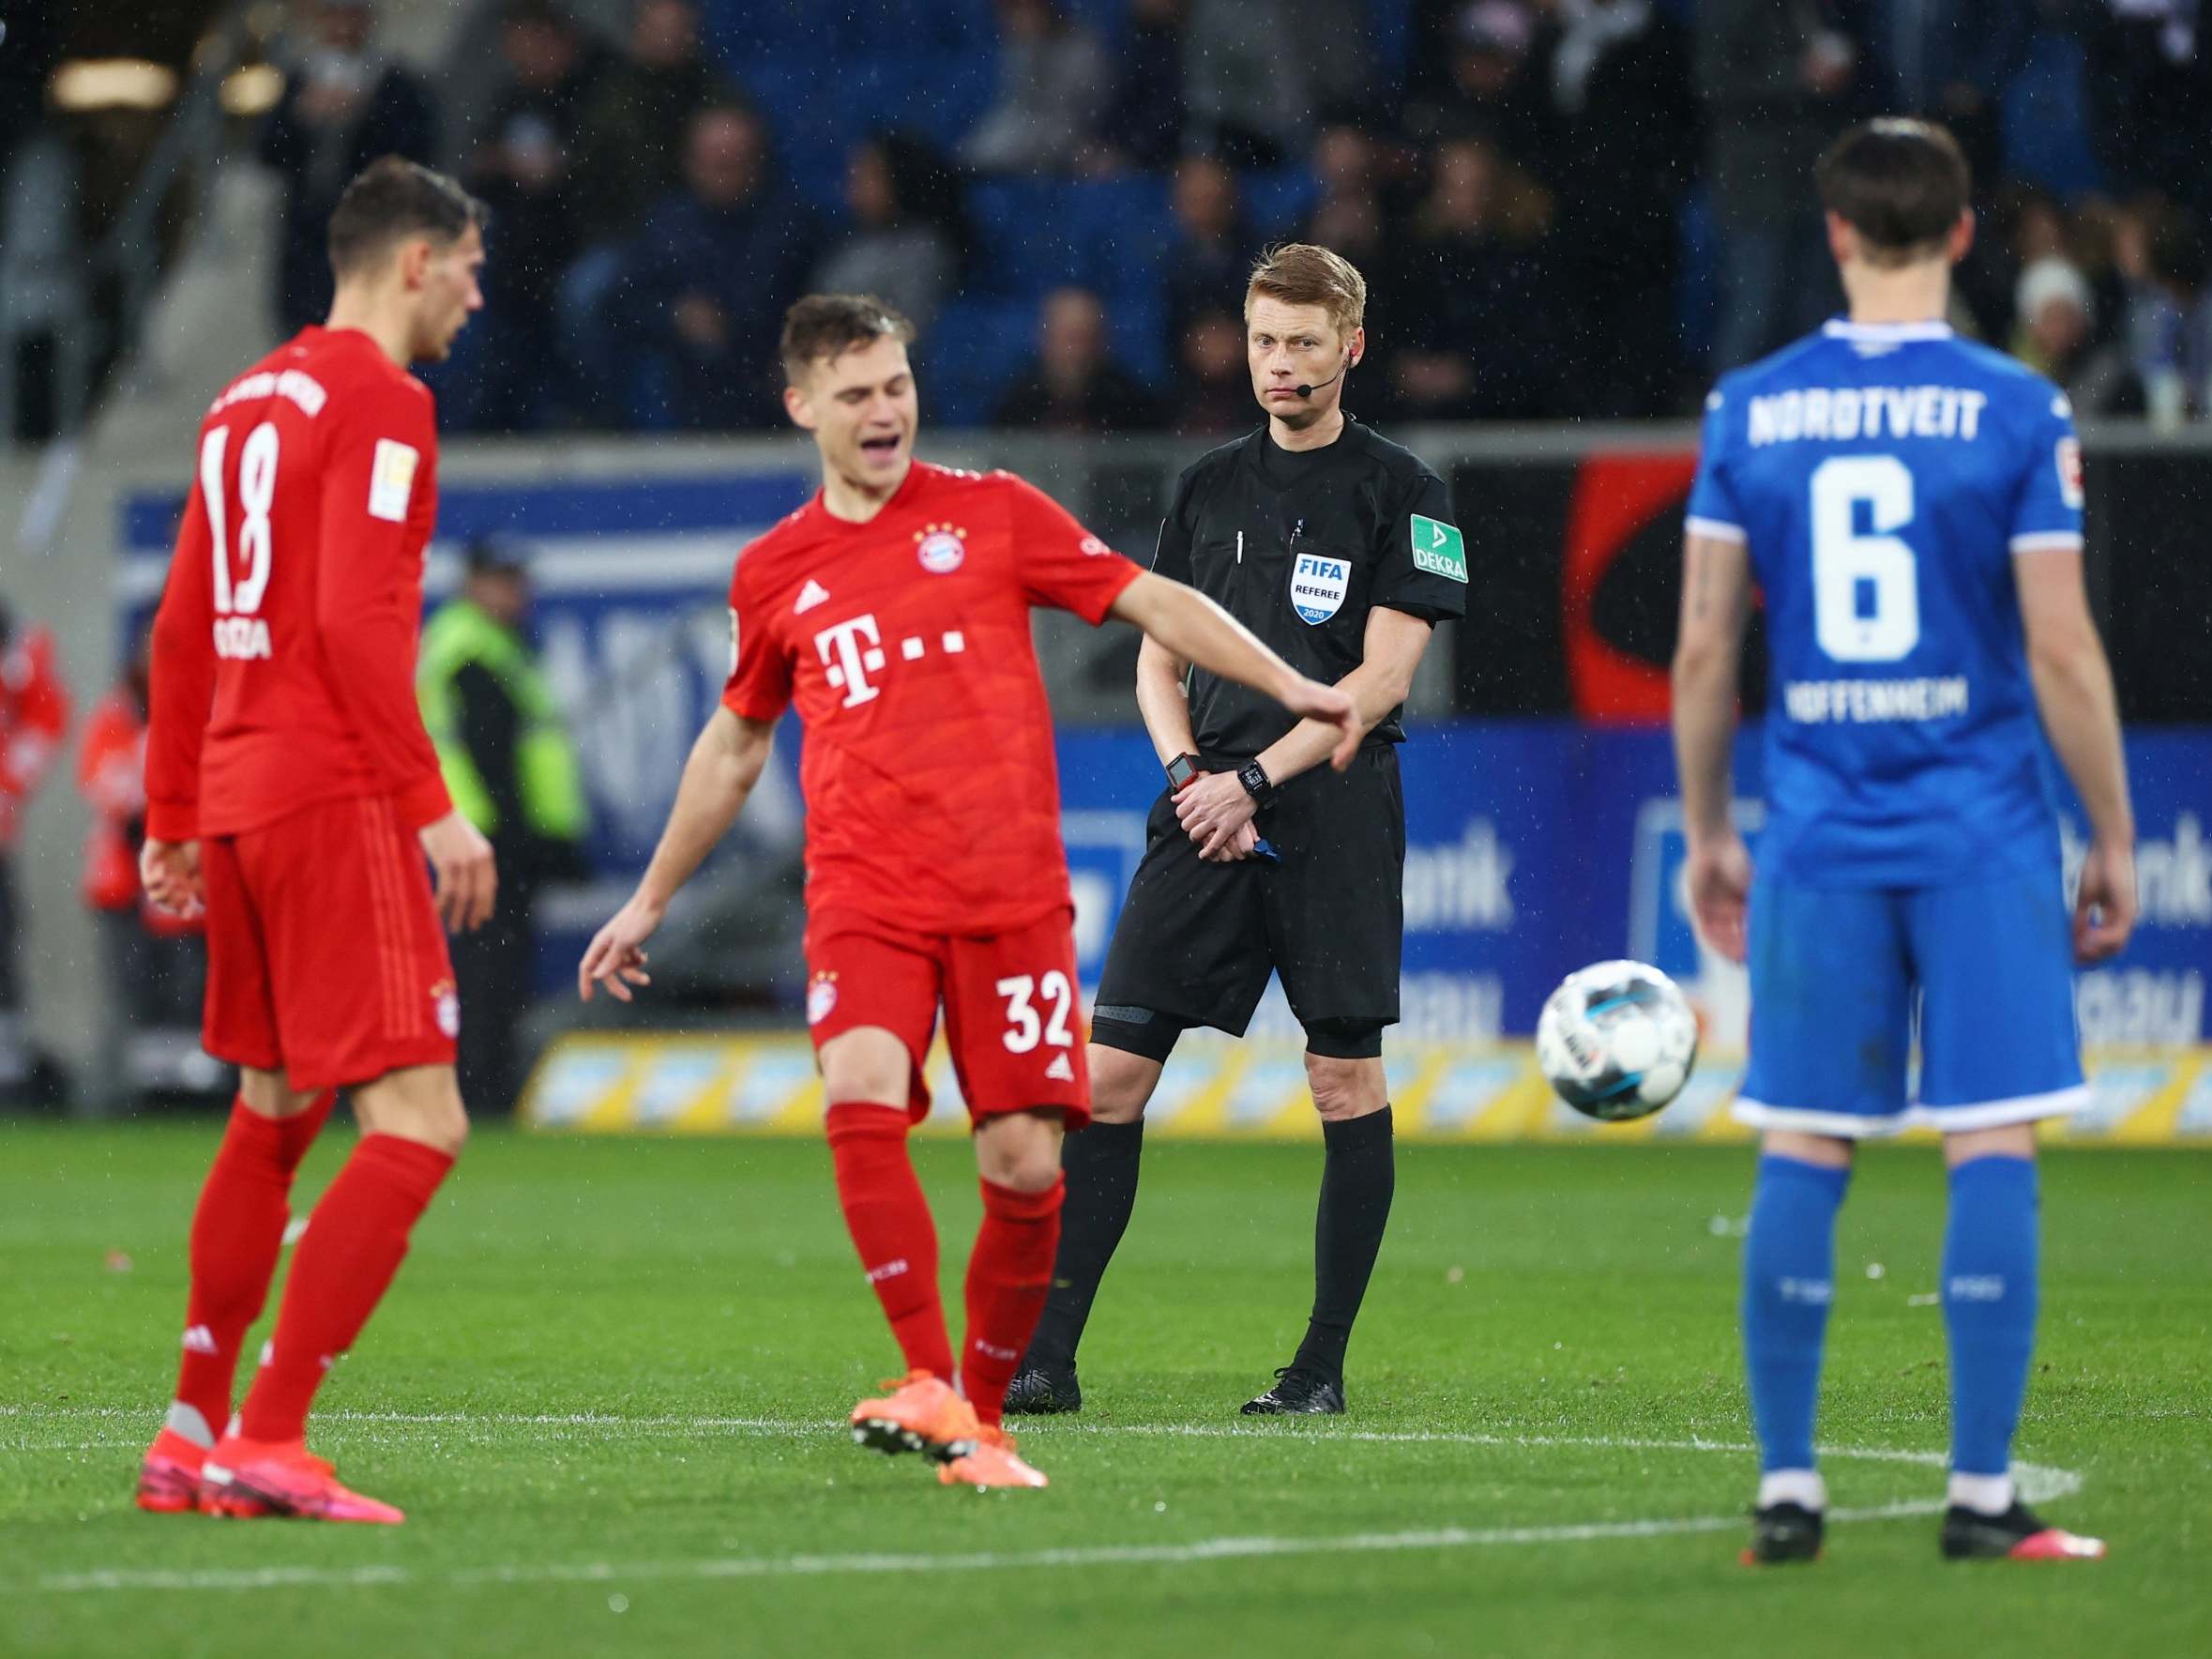 Bayern Munich and Hoffenheim finish match passing to each other in protest over offensive banner